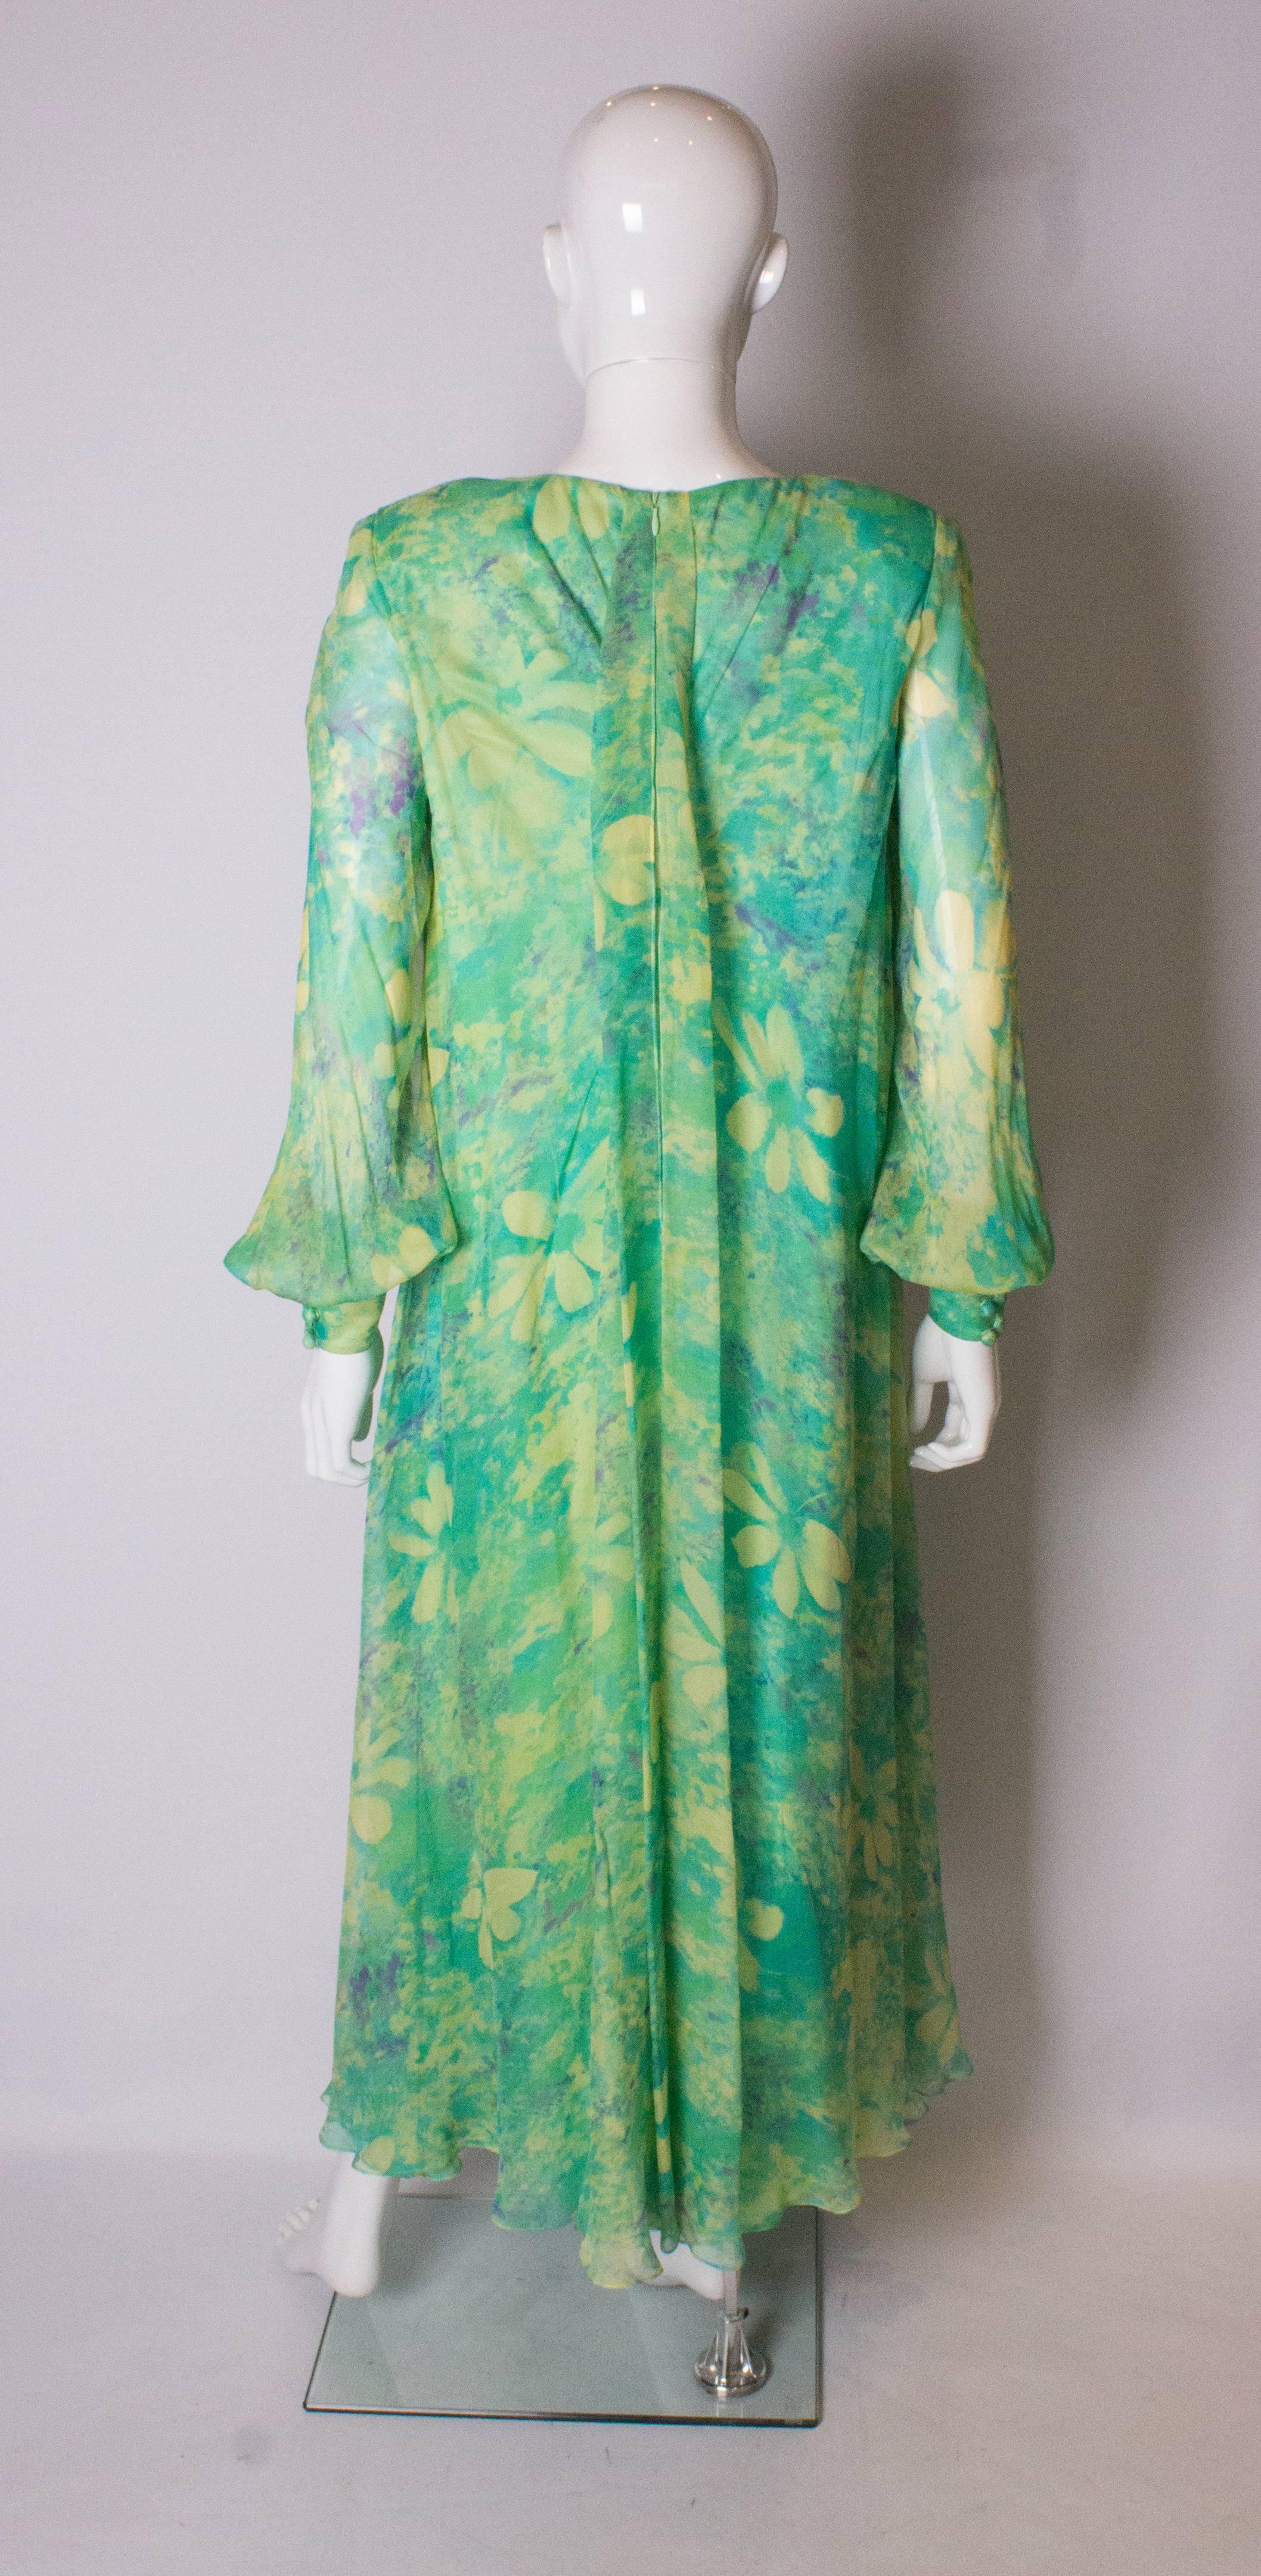 Women's or Men's Vintage 1970s green floral print silk dress by Alison Rodger For Sale